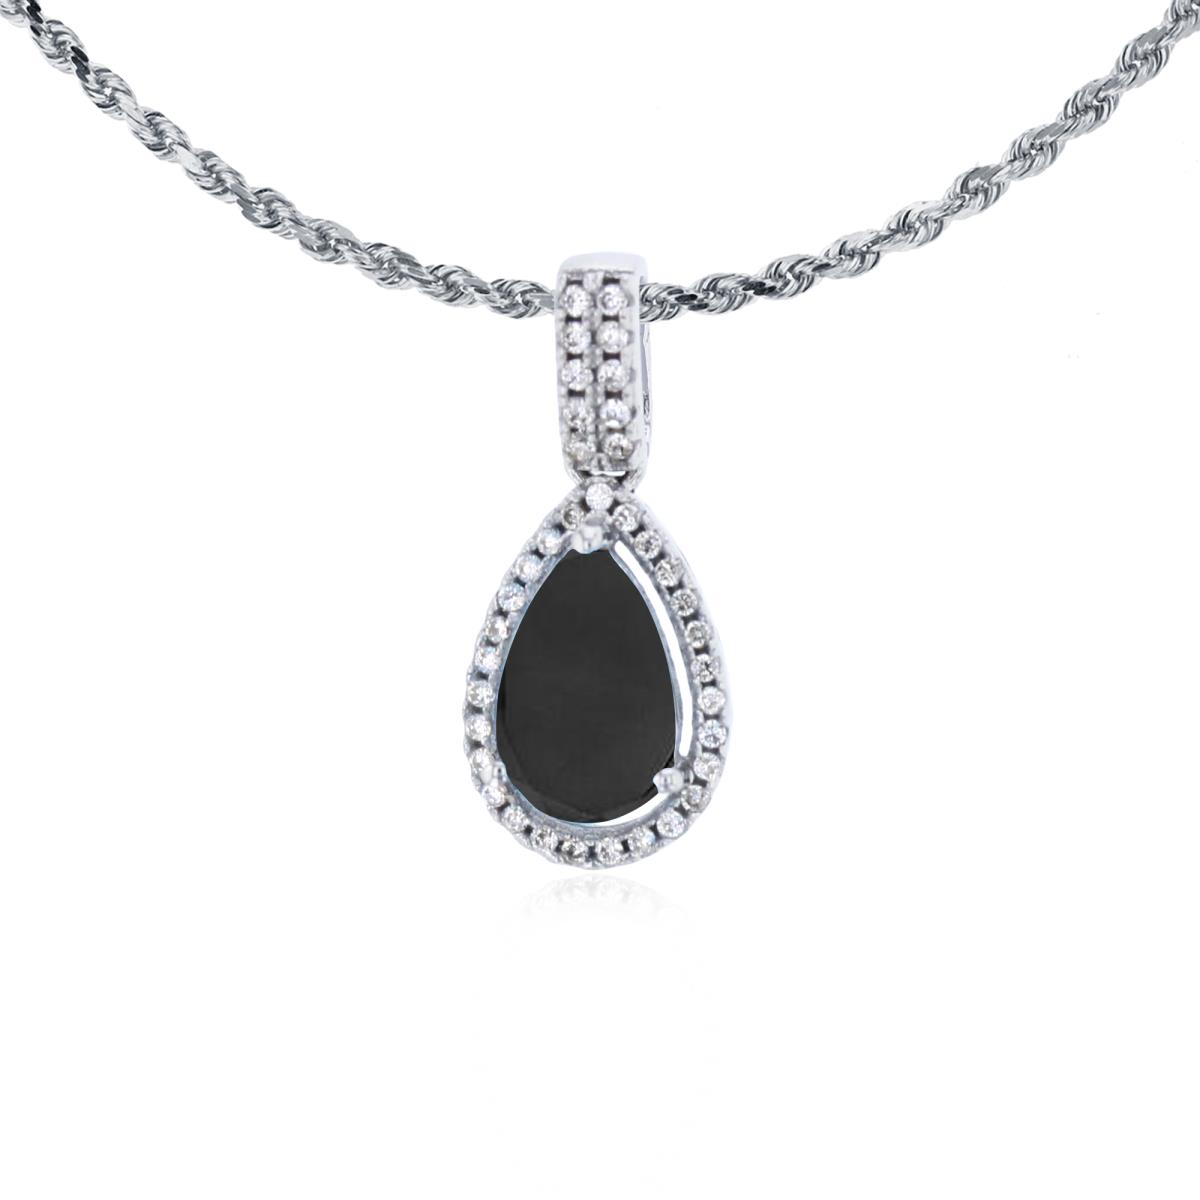 14K White Gold 8x5mm Pear Cut Onyx & 0.11 CTTW Diamond Halo 18" Rope Chain Necklace